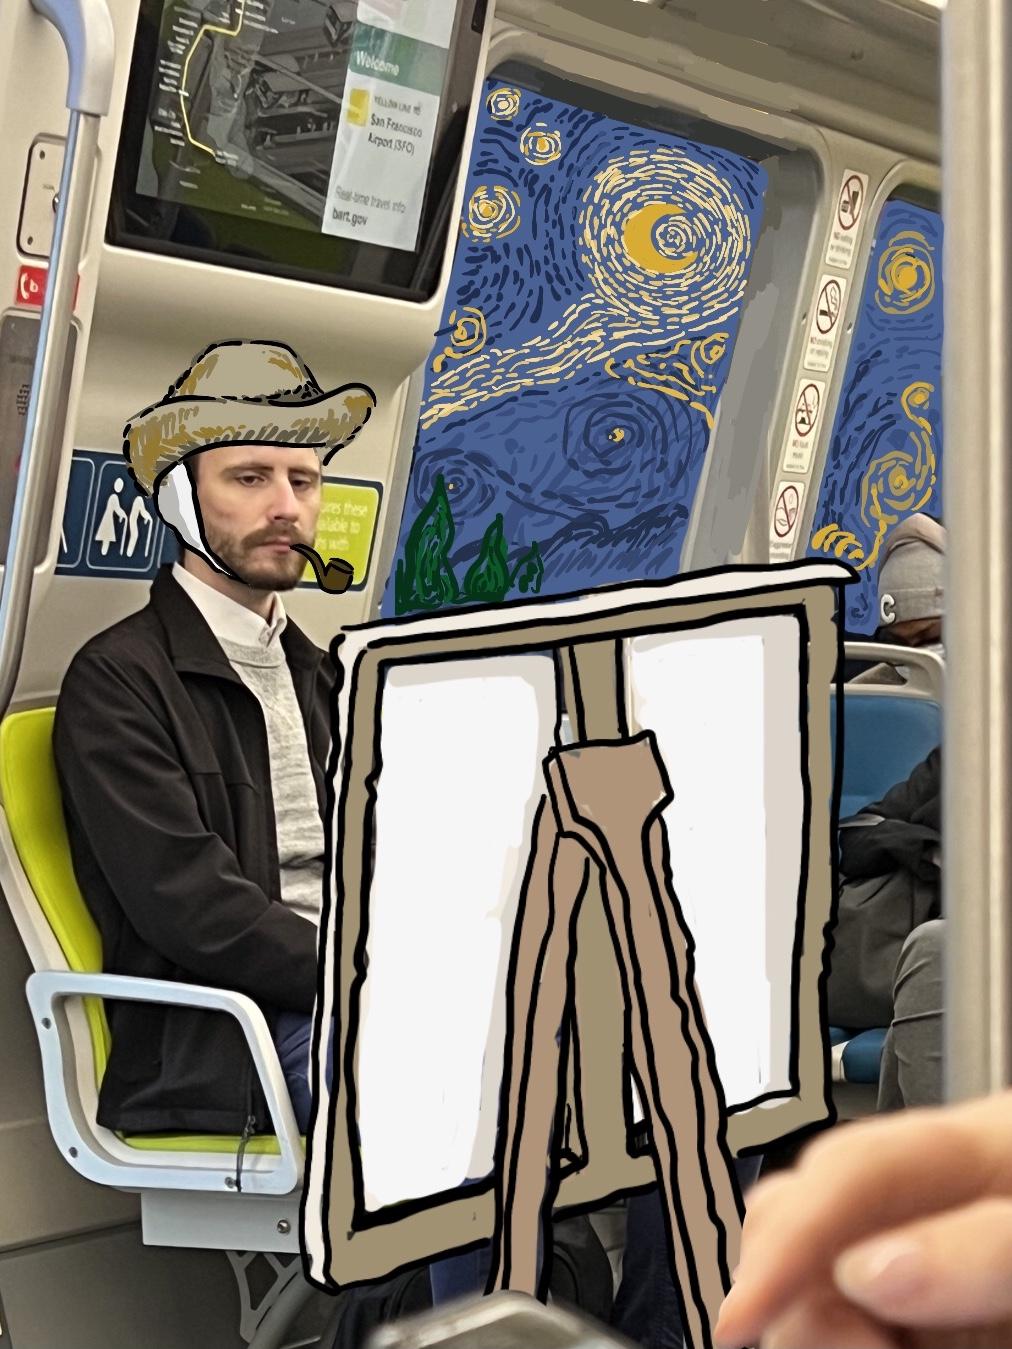 An illustration on o photo of a man on BART as Van Gough with Starry Night in the background and a canvas in front